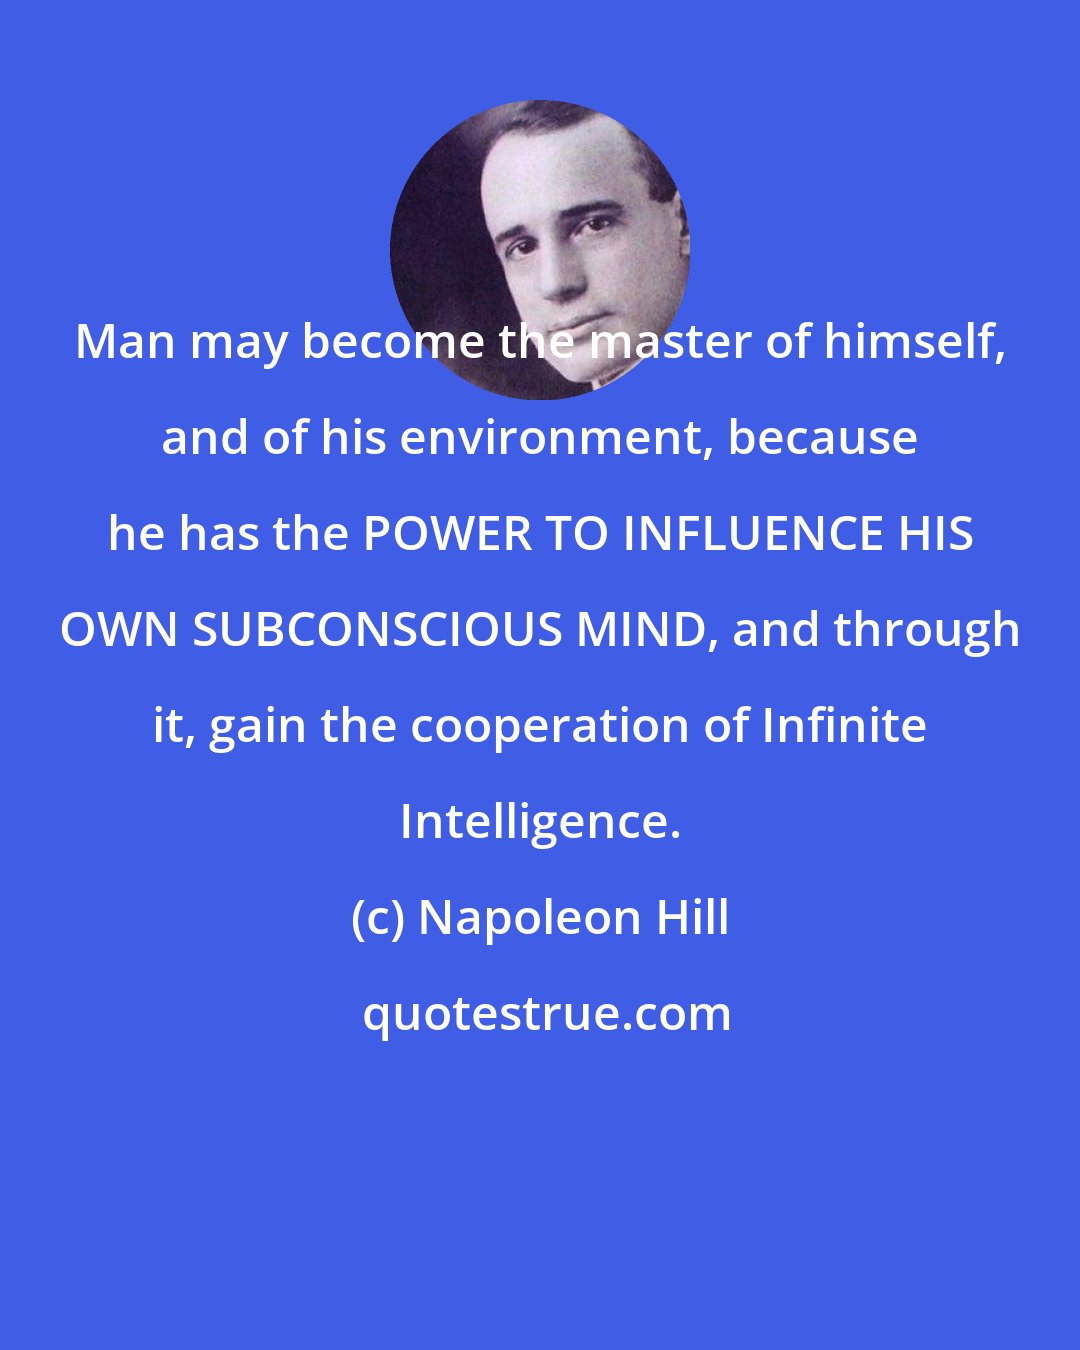 Napoleon Hill: Man may become the master of himself, and of his environment, because he has the POWER TO INFLUENCE HIS OWN SUBCONSCIOUS MIND, and through it, gain the cooperation of Infinite Intelligence.